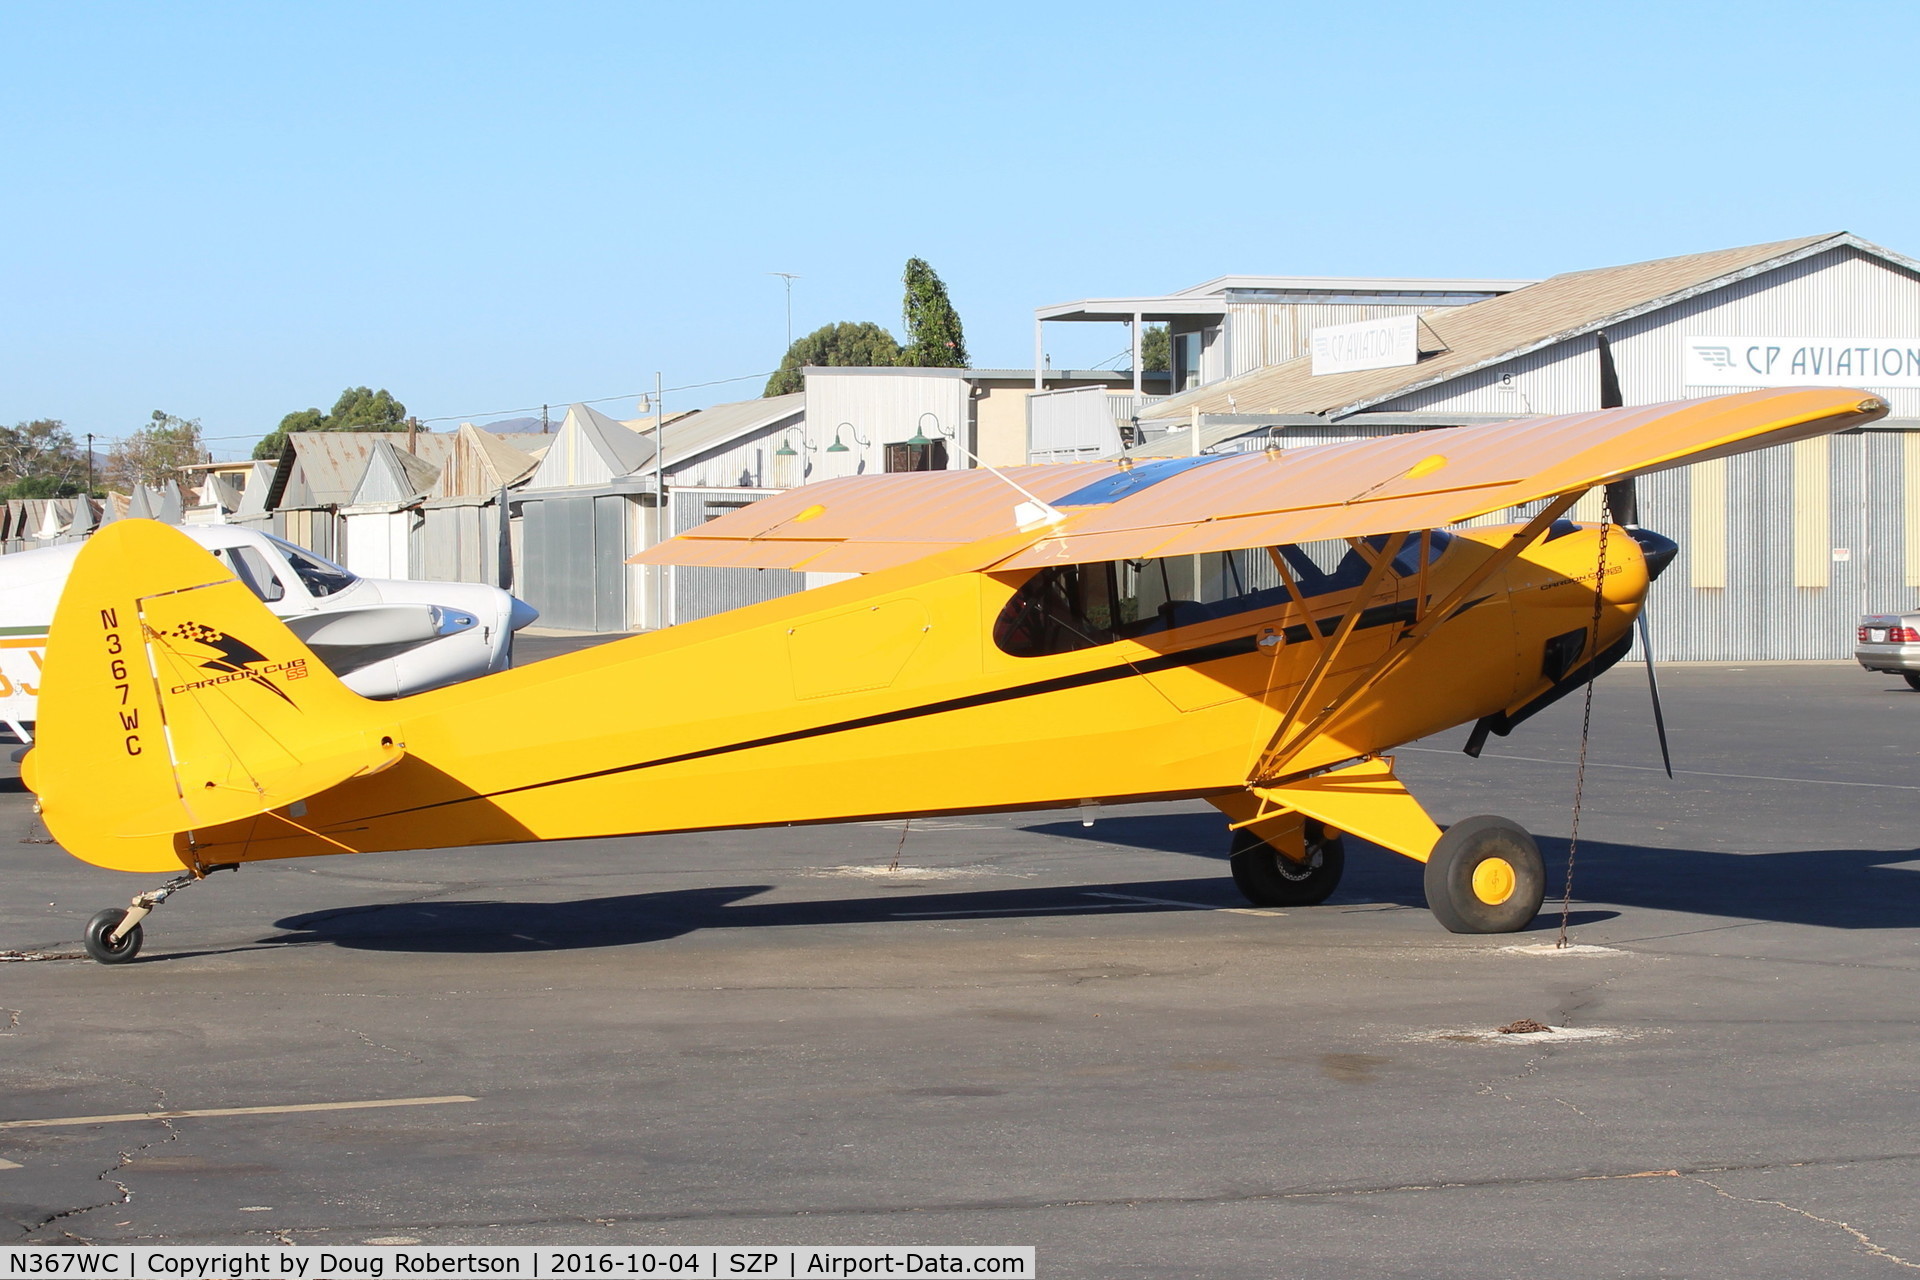 N367WC, Cub Crafters CC11-160 Carbon Cub SS C/N CC11-00151, 2010 CubCrafters CC11-160 CARBON CUB SS S-LSA, CubCrafters CC340 180 Hp for 5 minutes, 80 Hp continuous, on SZP Transient ramp